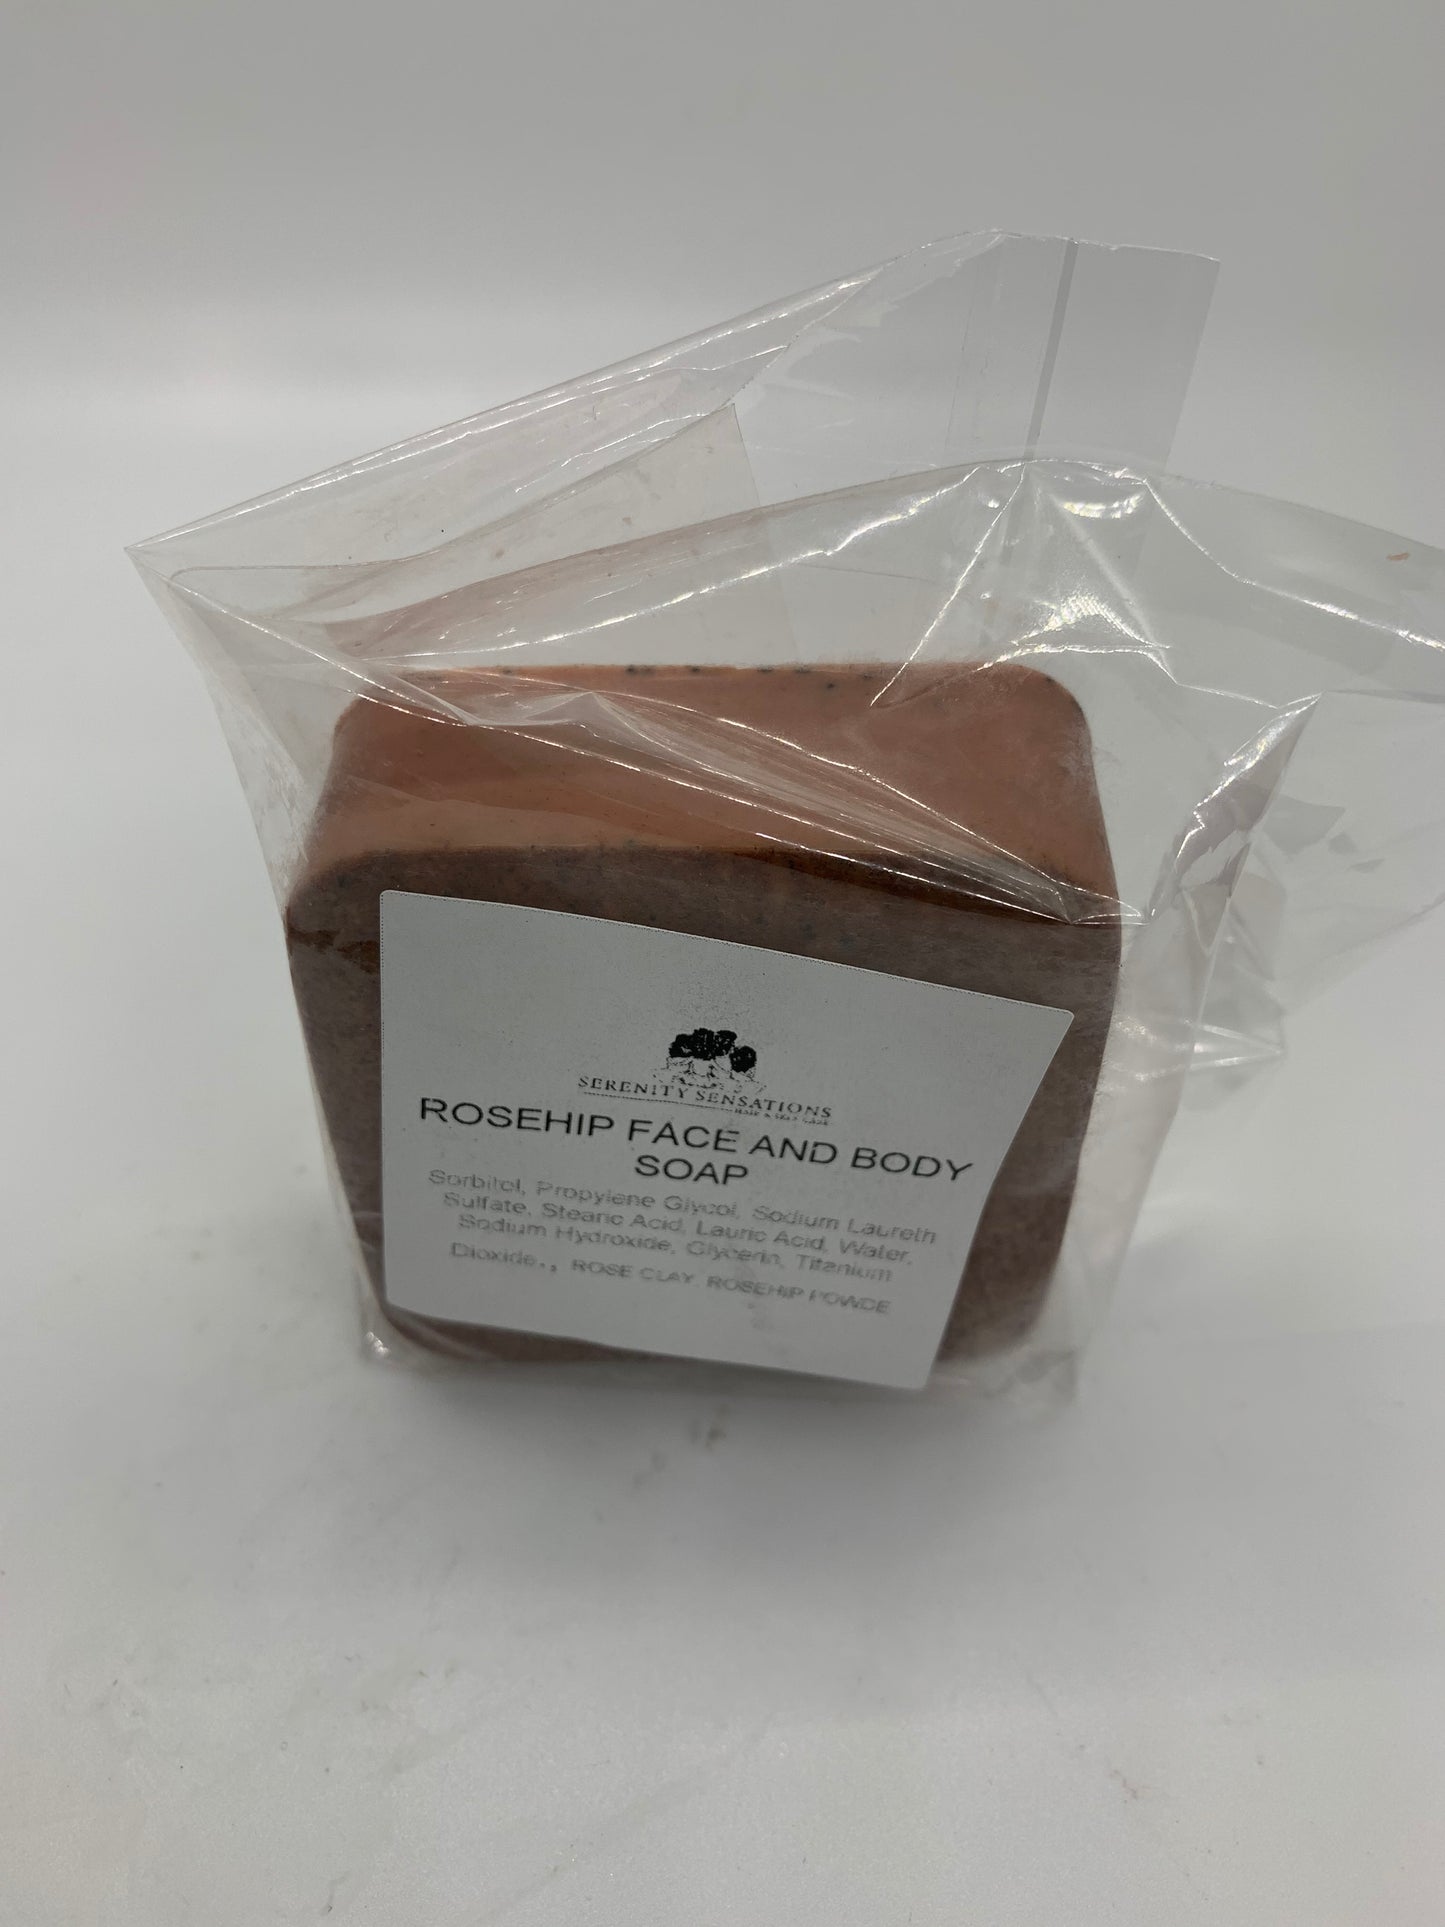 ROSE HIP FACE AND BODY SOAP